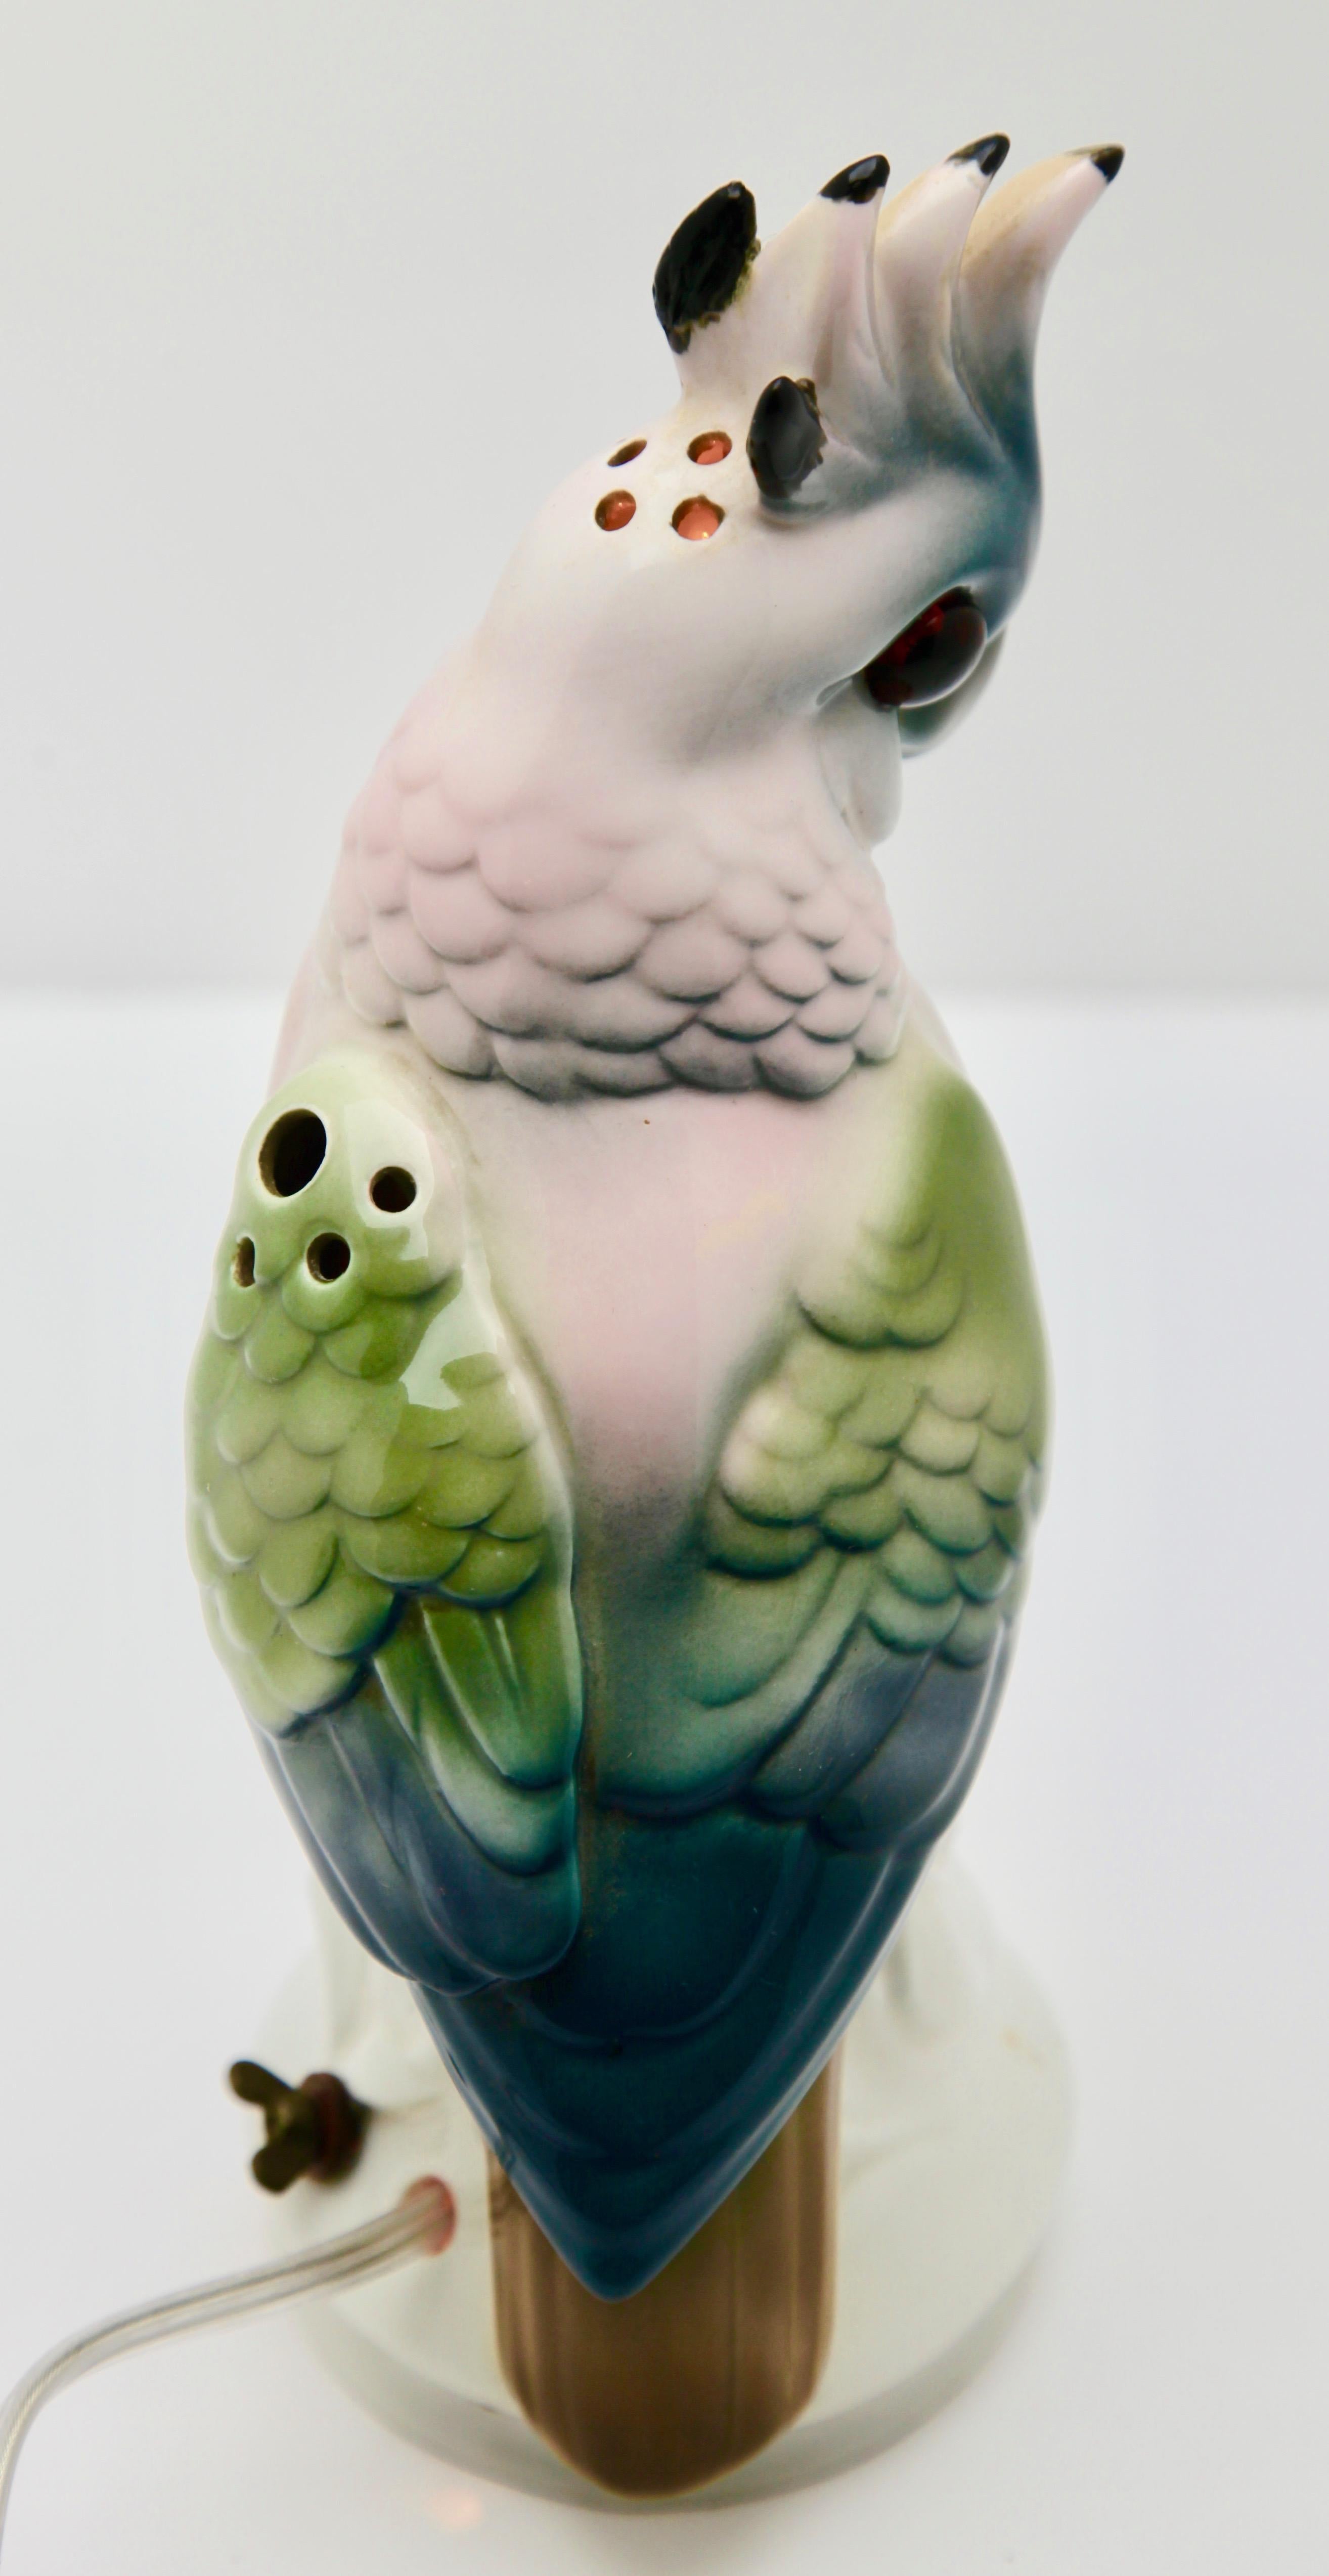 Made in Germany during the 1930s, this porcelain figurine is also an air aromiser and nightlight or table lamp.
Modelled as a cockatoo perched on a rock with hand painted plumage in blues, and greens. This friendly bedside companion features a